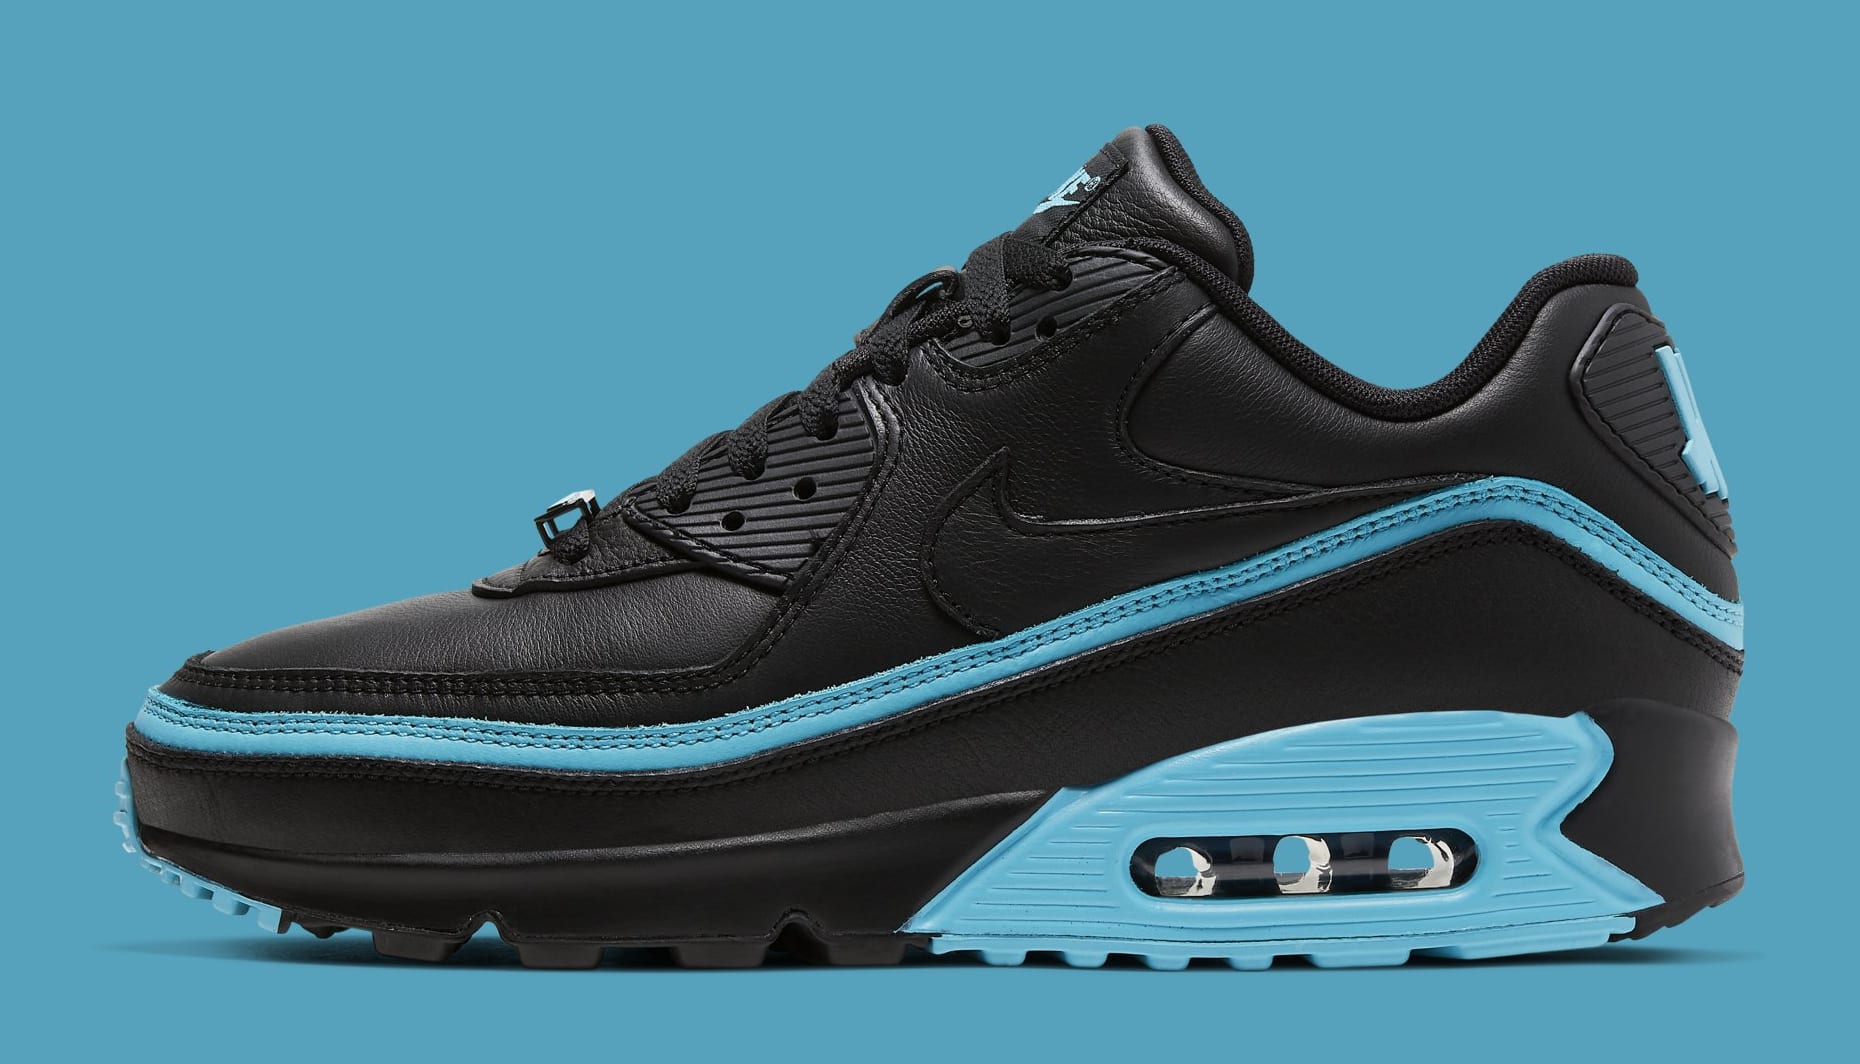 undefeated-nike-air-max-90-black-blue-fury-cj7197-002-lateral